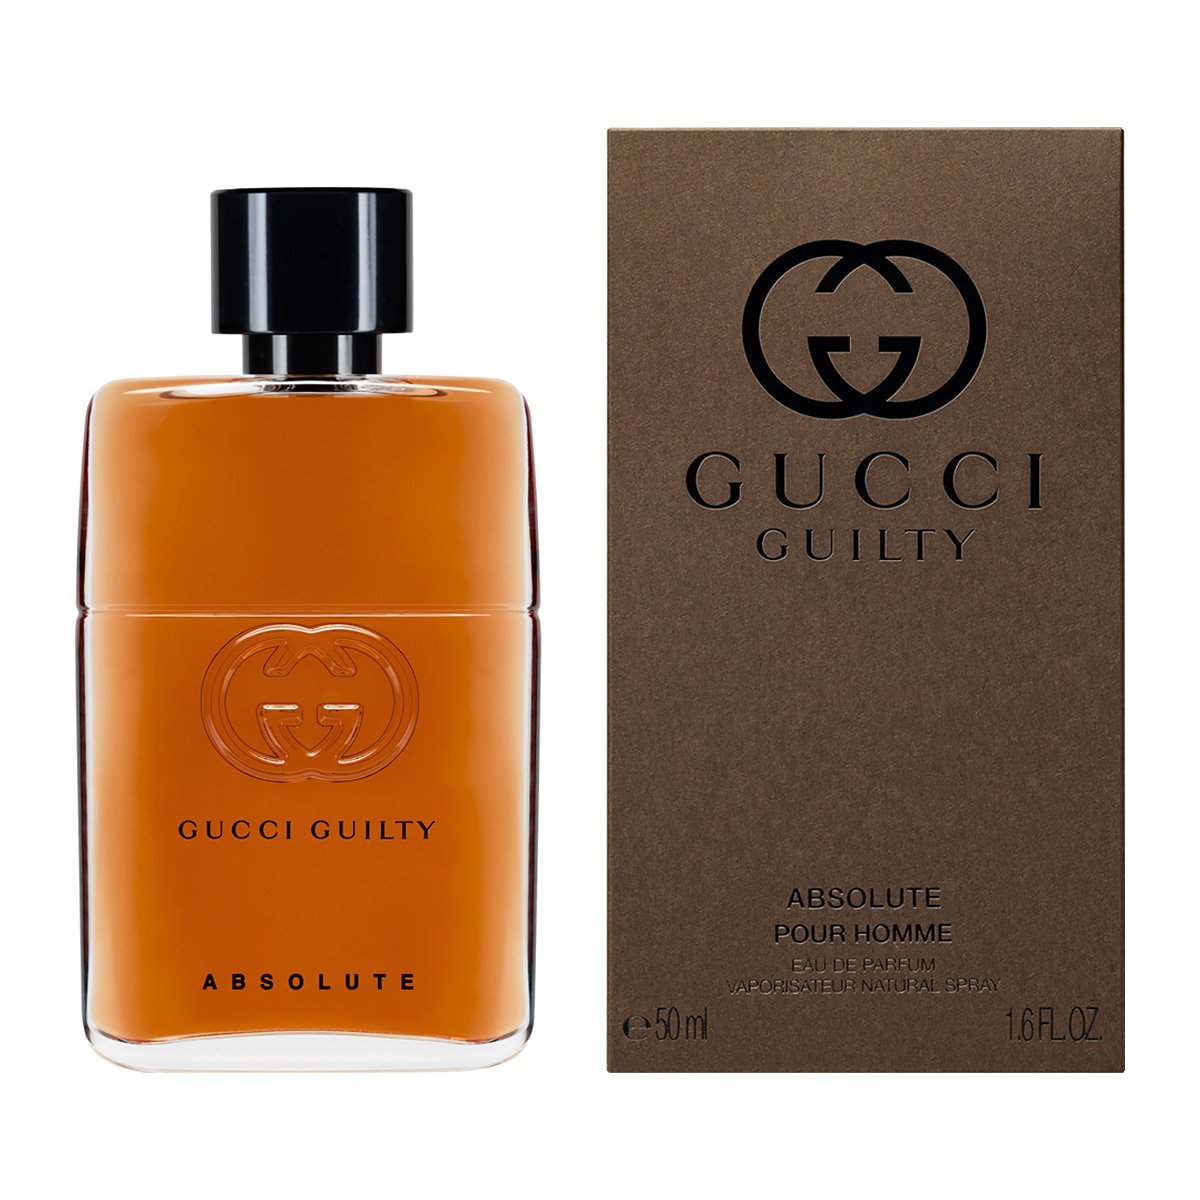 assets/images/gucci/gucci_guilty_absolute_pour_homme.jpg